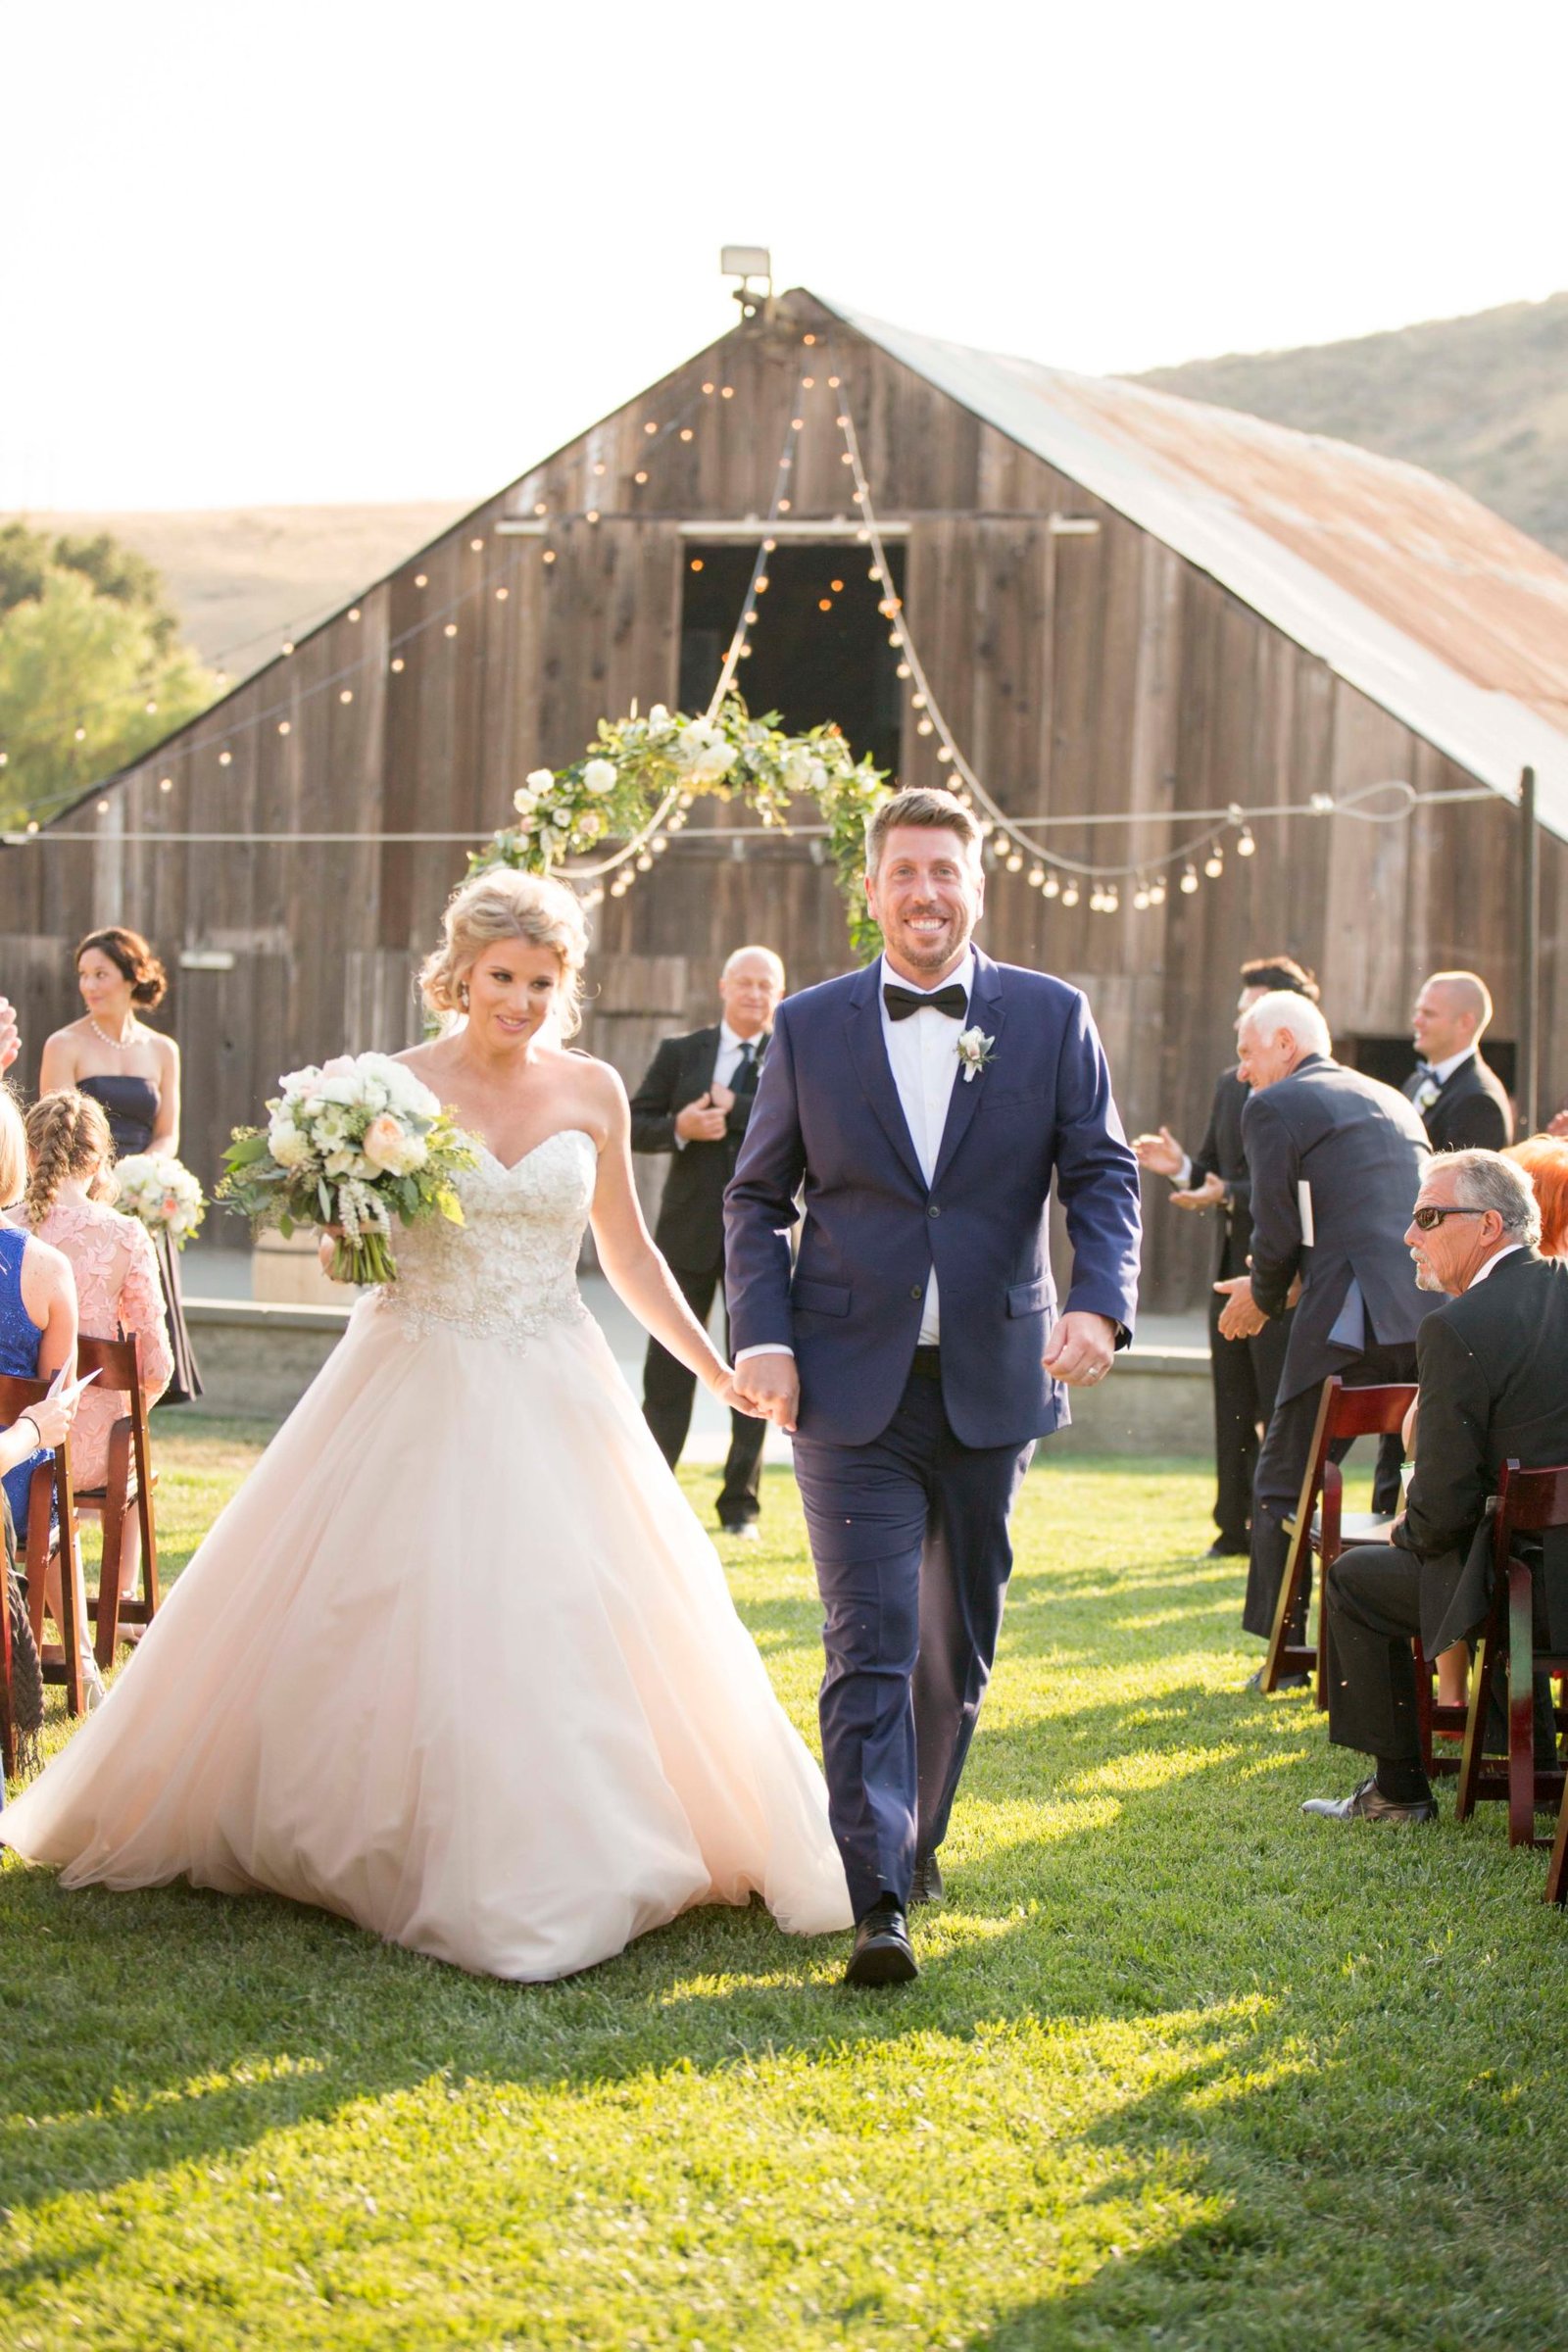 Bride and groom walking down the aisle after the ceremony at Higuera Ranch